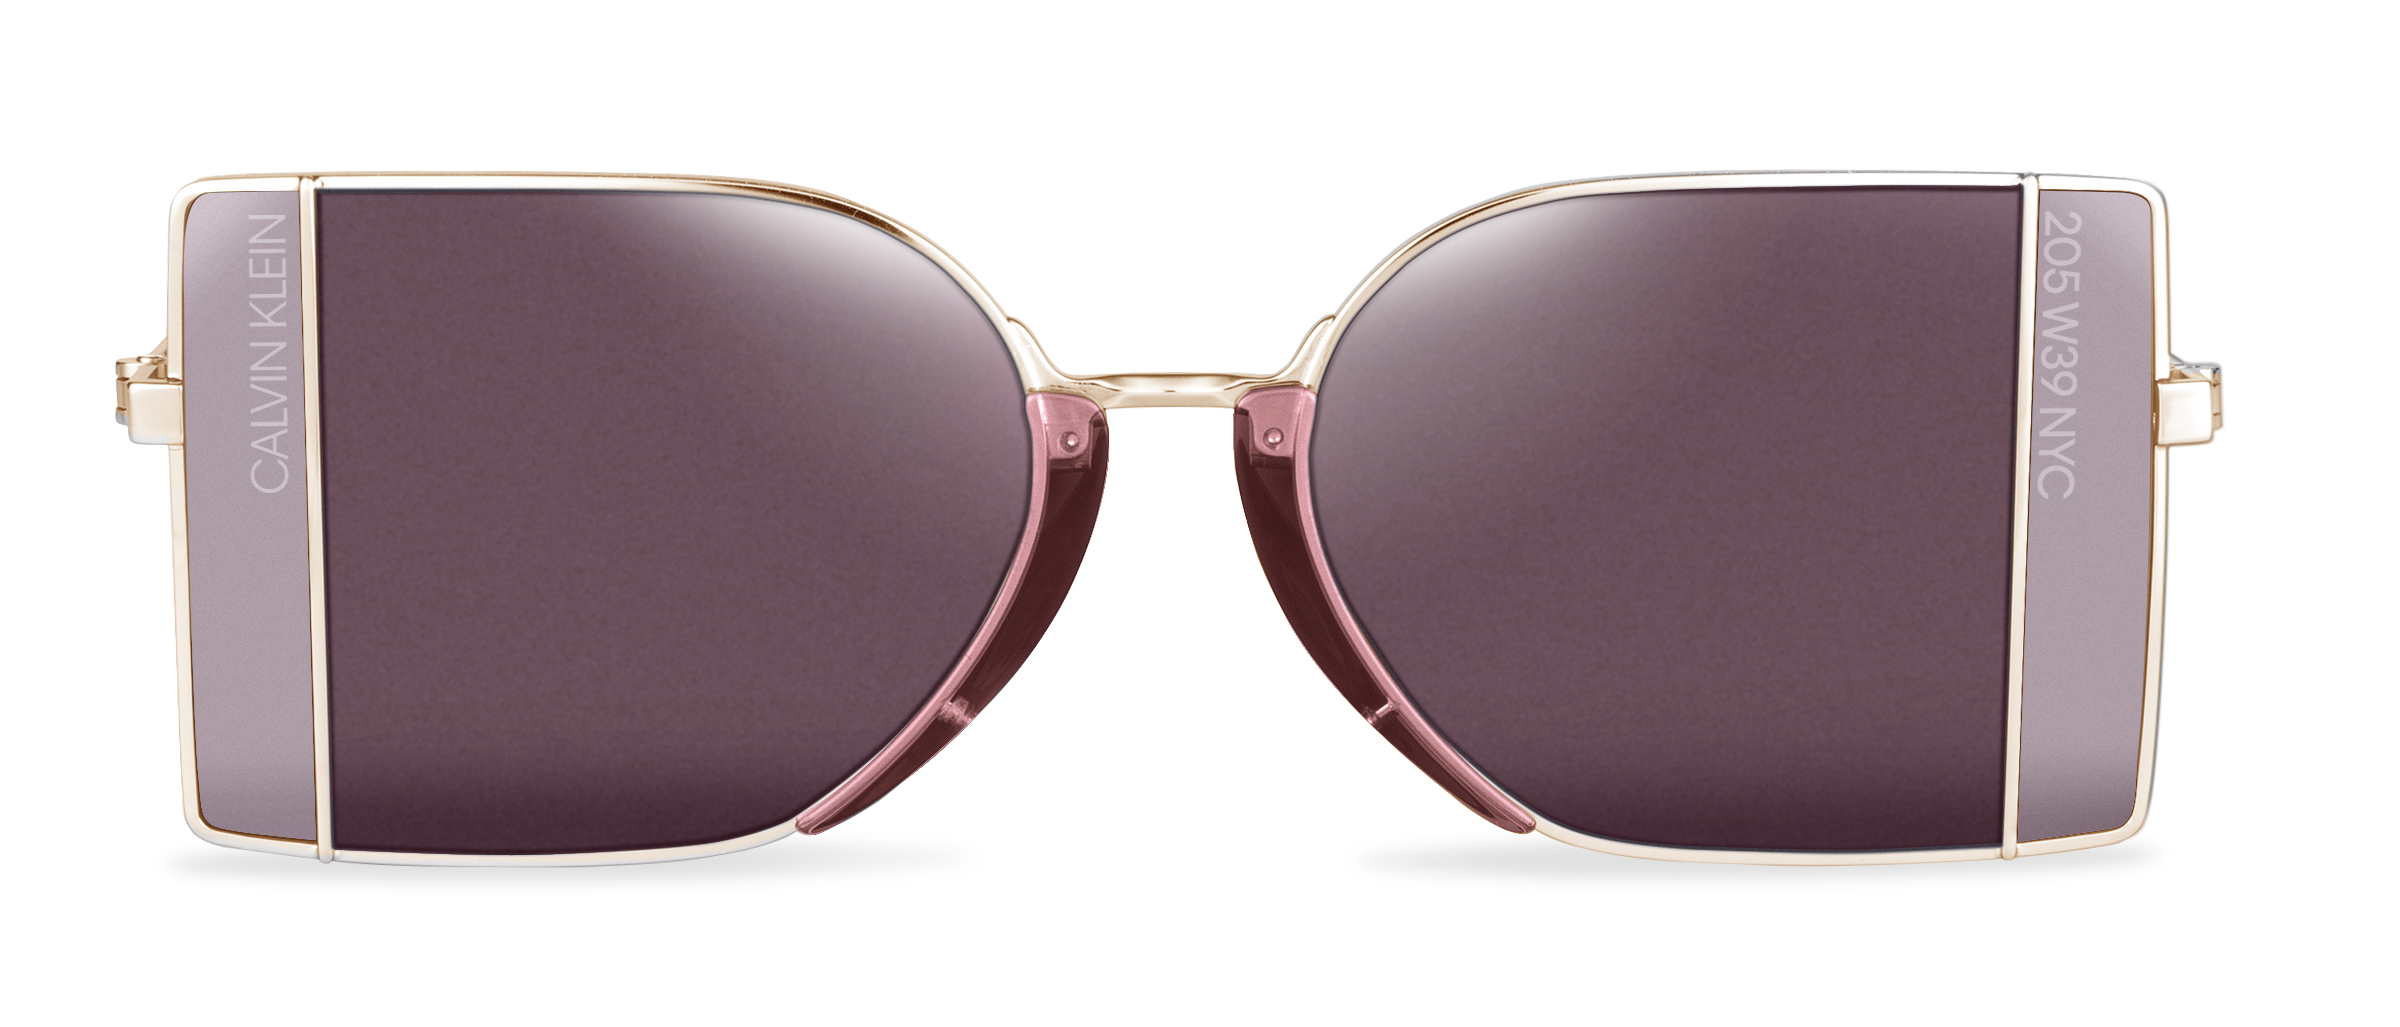 DISCOVER THE FIRST CALVIN KLEIN 205W39NYC EYEWEAR LINE